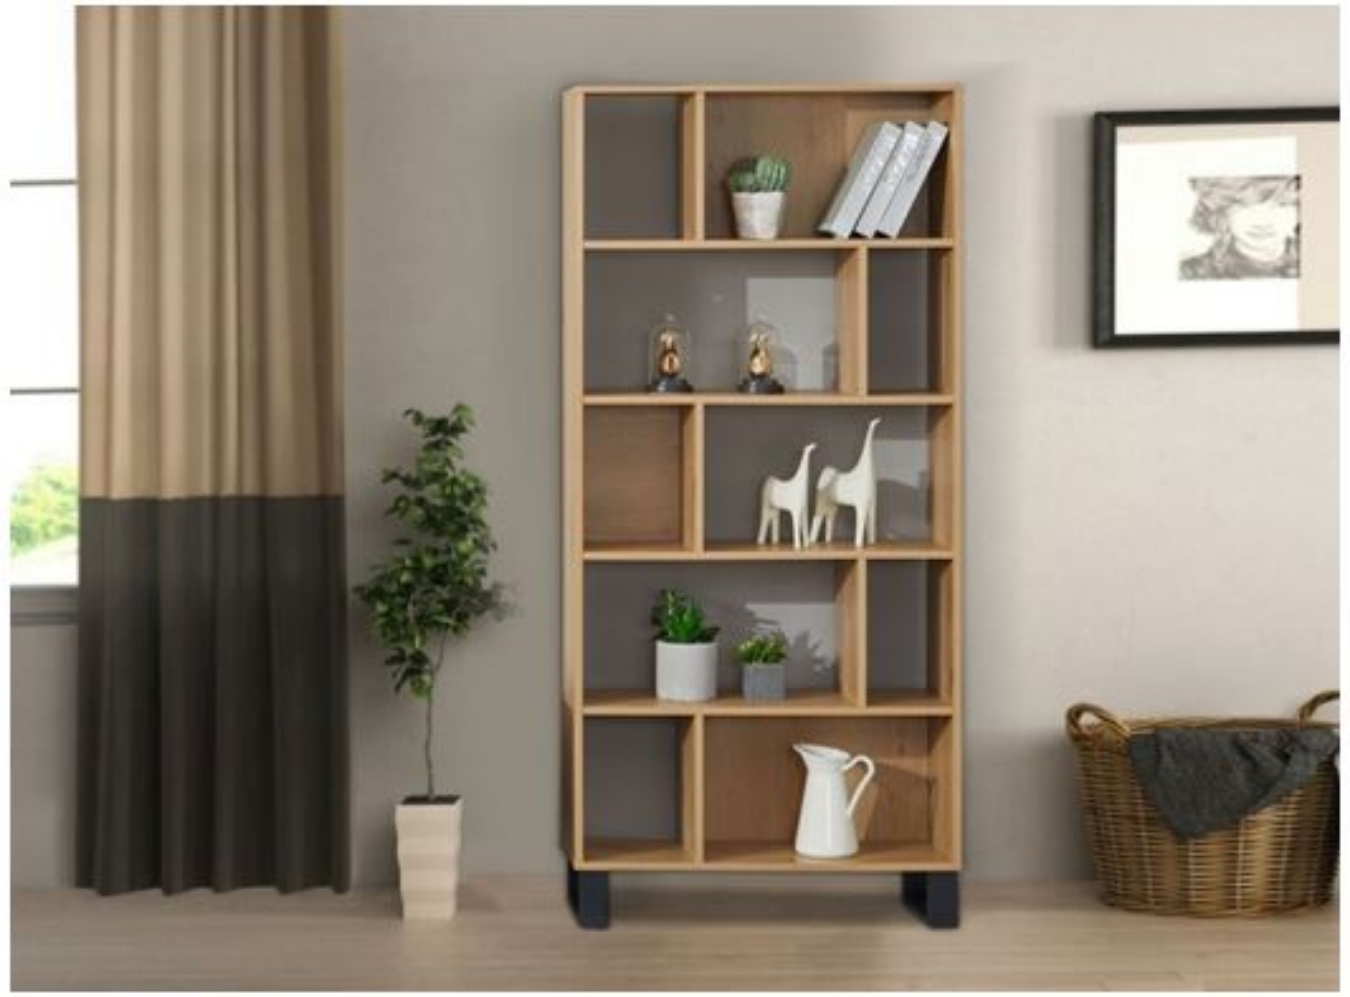 Ample space for storing and displaying book collection, DVDs or other decorative items with Bronte Oak Bookcase.